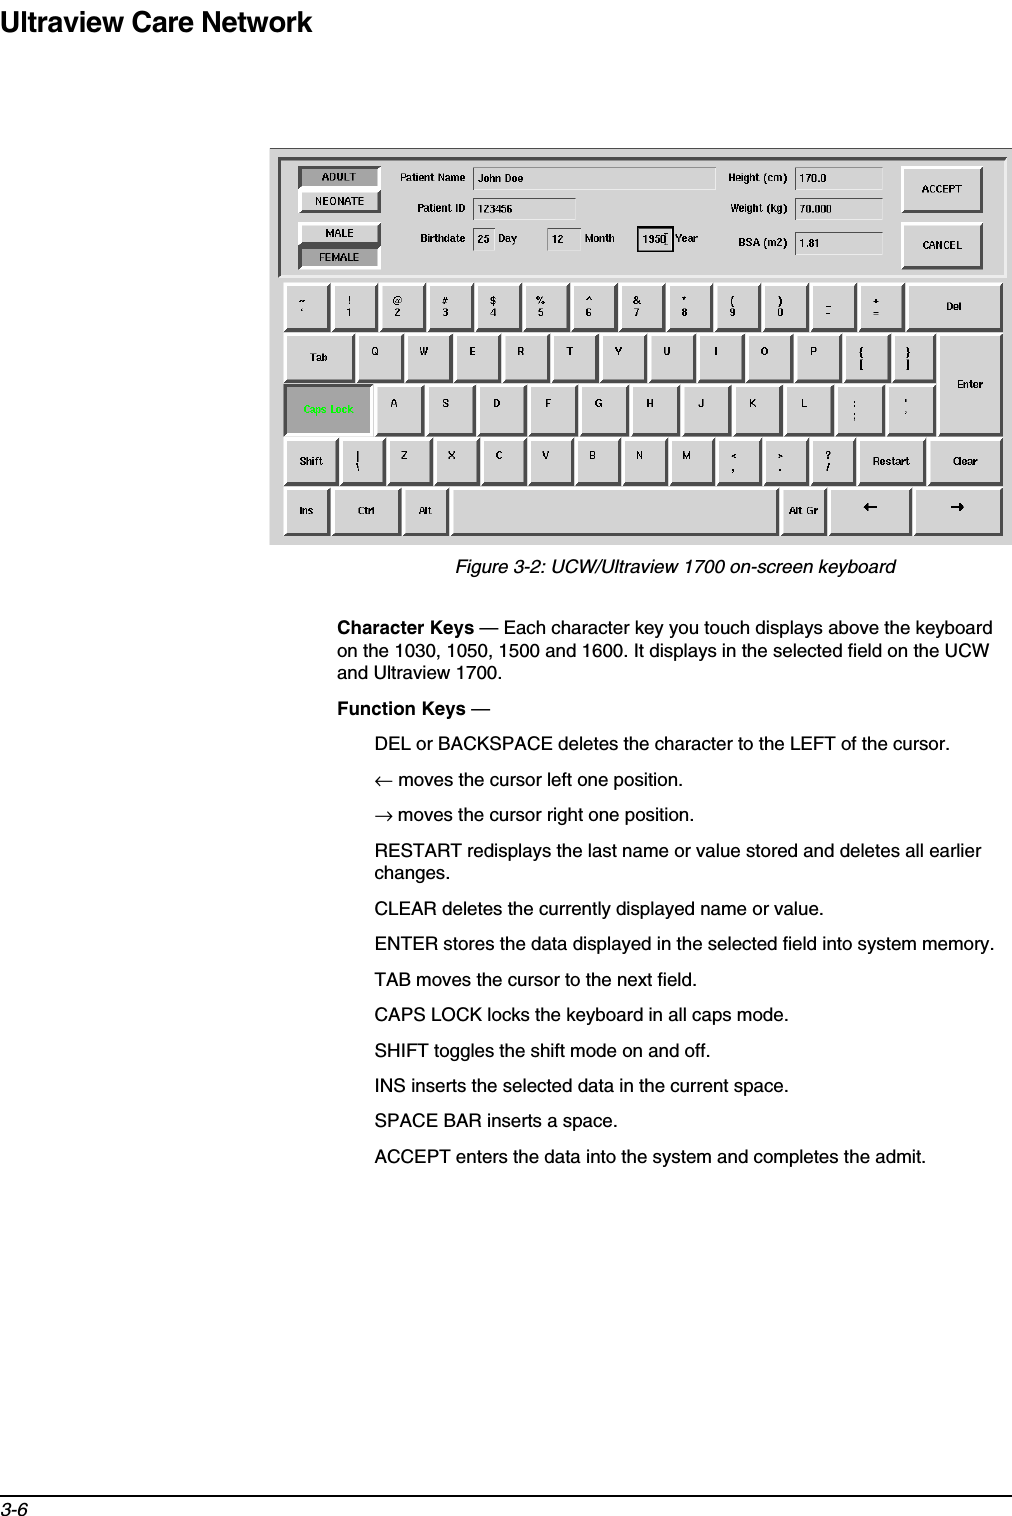 Ultraview Care Network3-6Figure 3-2: UCW/Ultraview 1700 on-screen keyboard Character Keys — Each character key you touch displays above the keyboard on the 1030, 1050, 1500 and 1600. It displays in the selected field on the UCW and Ultraview 1700.Function Keys — DEL or BACKSPACE deletes the character to the LEFT of the cursor.← moves the cursor left one position.→ moves the cursor right one position.RESTART redisplays the last name or value stored and deletes all earlier changes.CLEAR deletes the currently displayed name or value.ENTER stores the data displayed in the selected field into system memory.TAB moves the cursor to the next field.CAPS LOCK locks the keyboard in all caps mode.SHIFT toggles the shift mode on and off.INS inserts the selected data in the current space.SPACE BAR inserts a space.ACCEPT enters the data into the system and completes the admit.